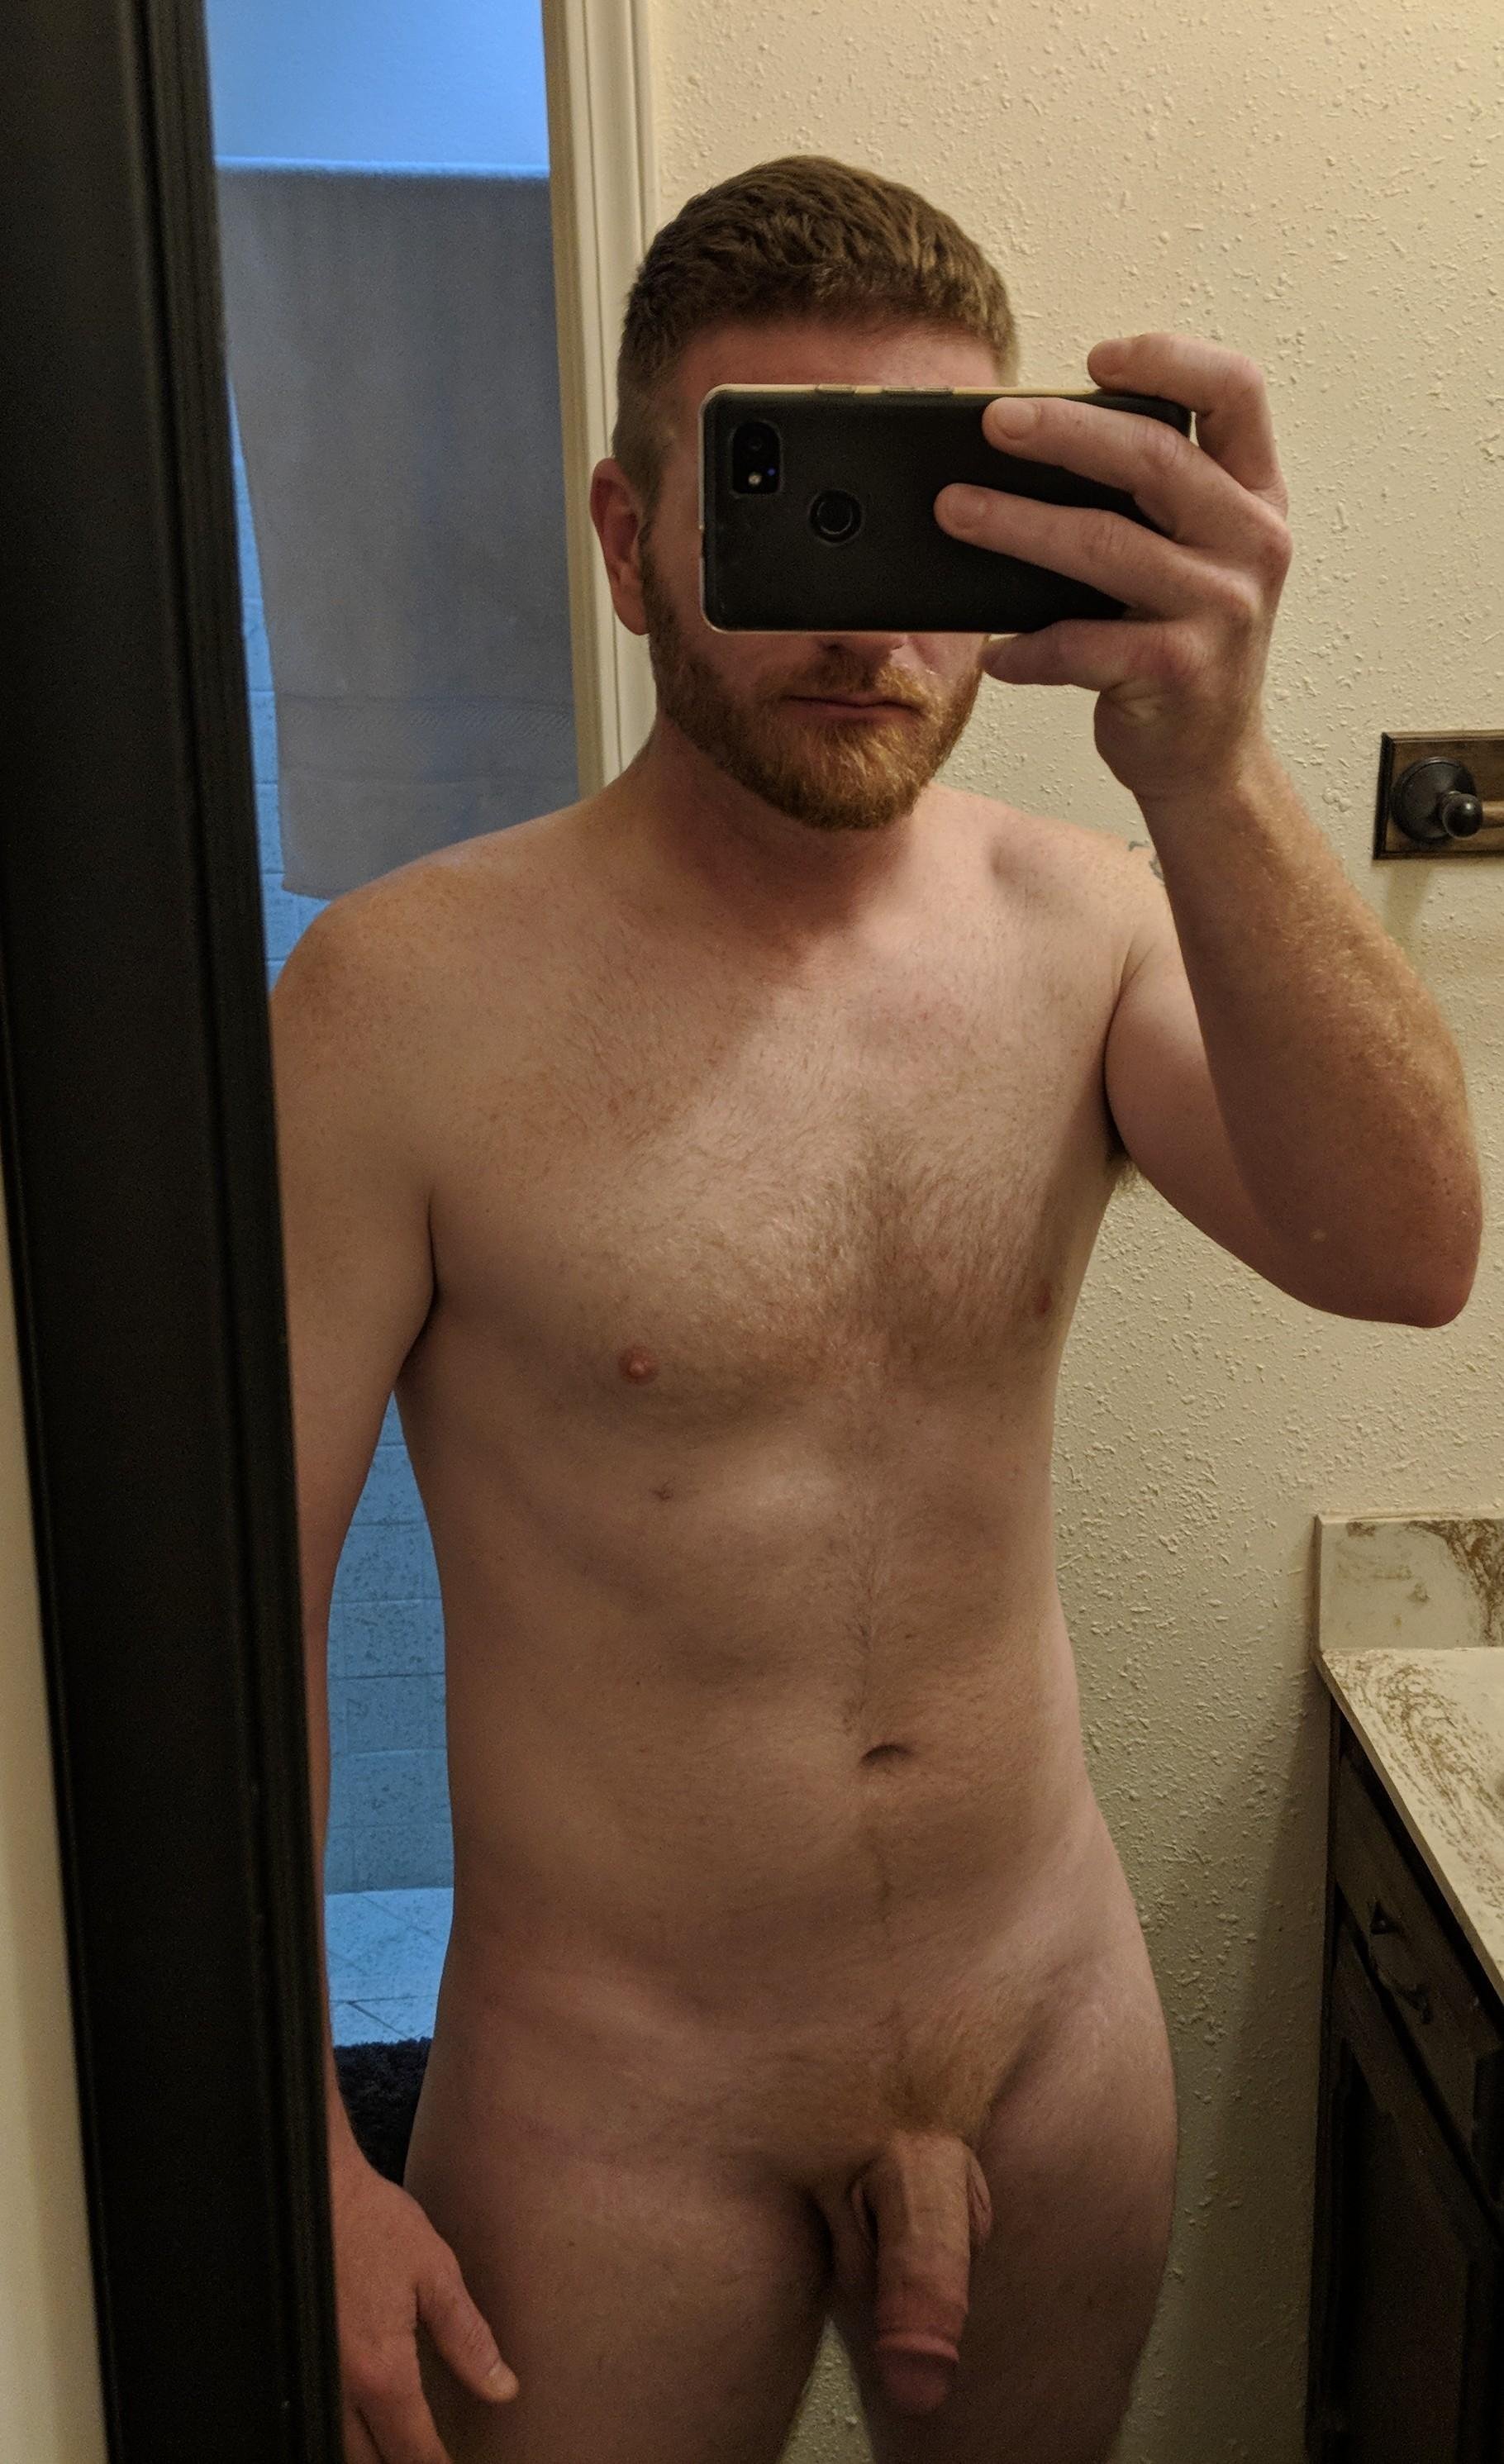 Someone suggested I post this here too... recently turned 40 and divorced... Have lost a lot of weight the last few years and trying to bulk up. Its been a great summer so far!